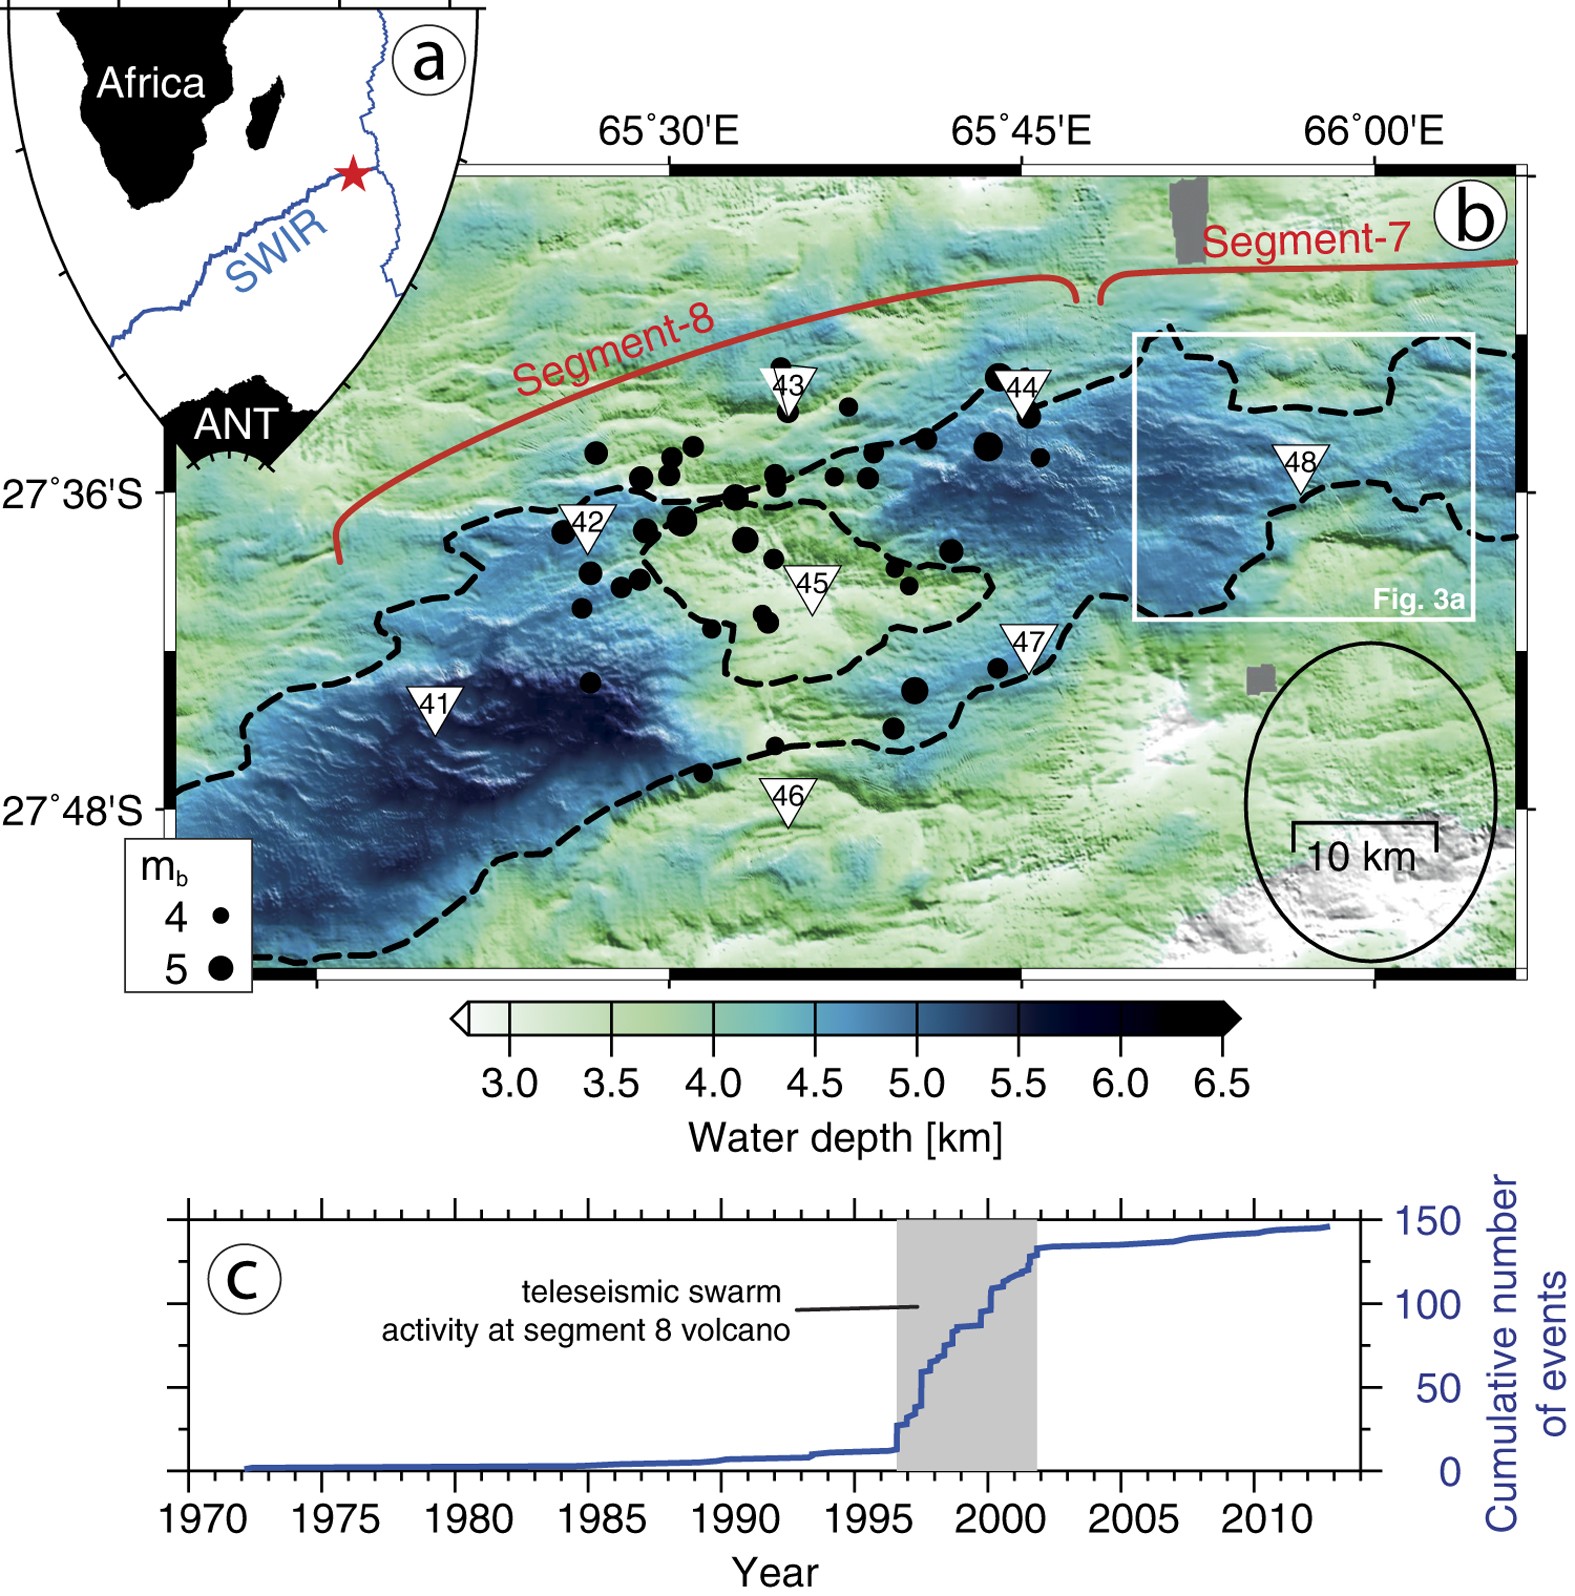 Magma Plumbing System And Seismicity Of An Active Mid Ocean Ridge